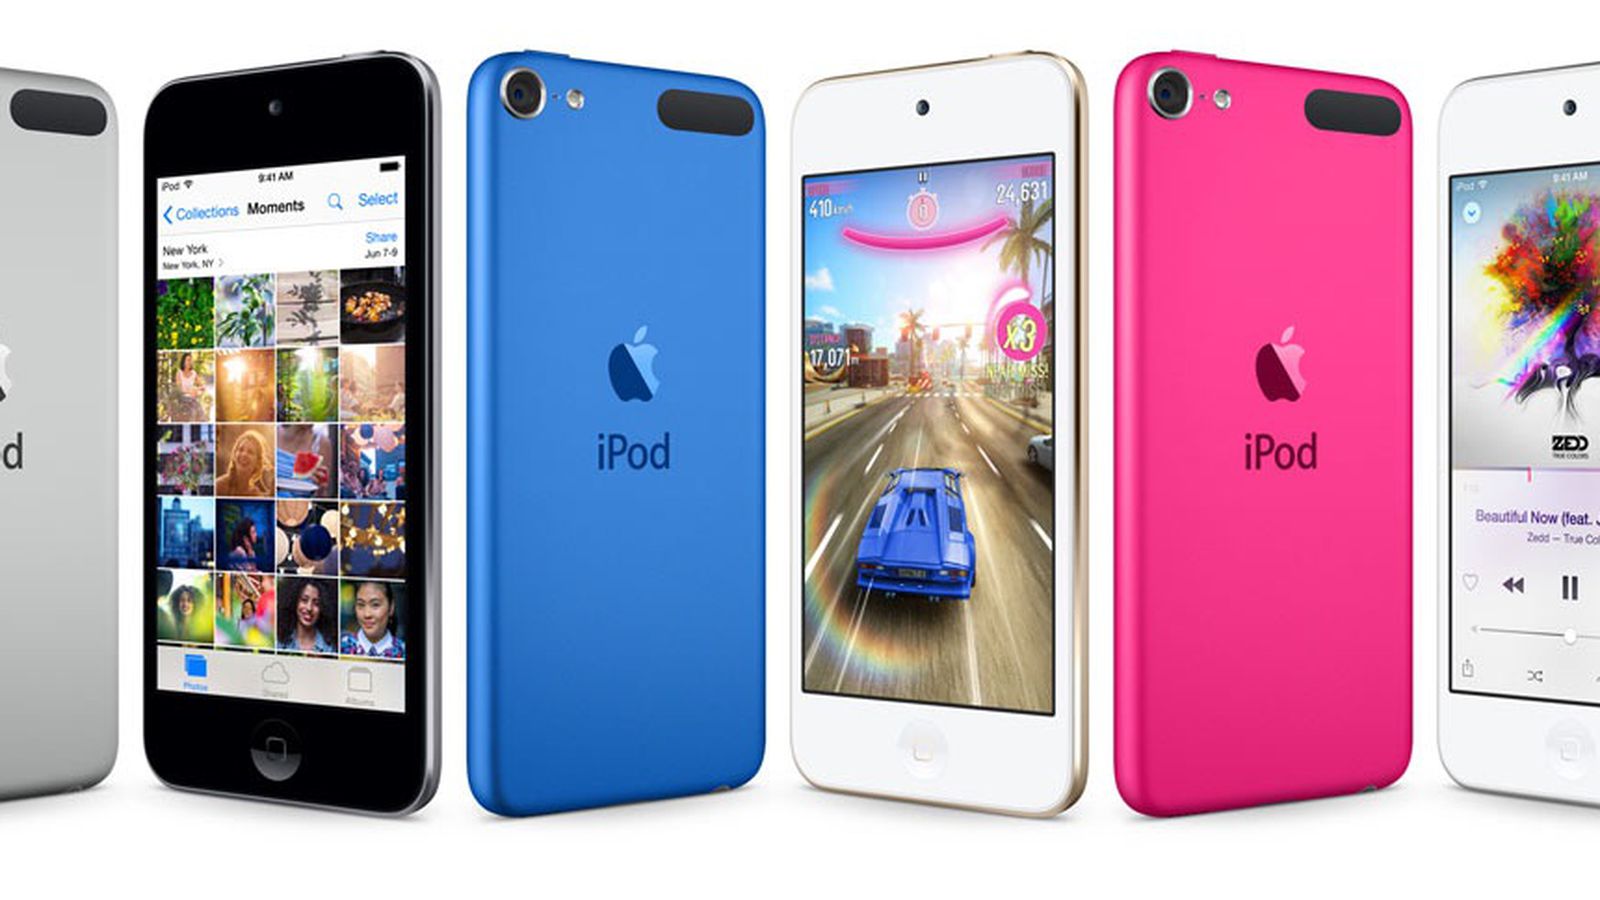 iPod touch: Updated With A10 Chip and More Storage